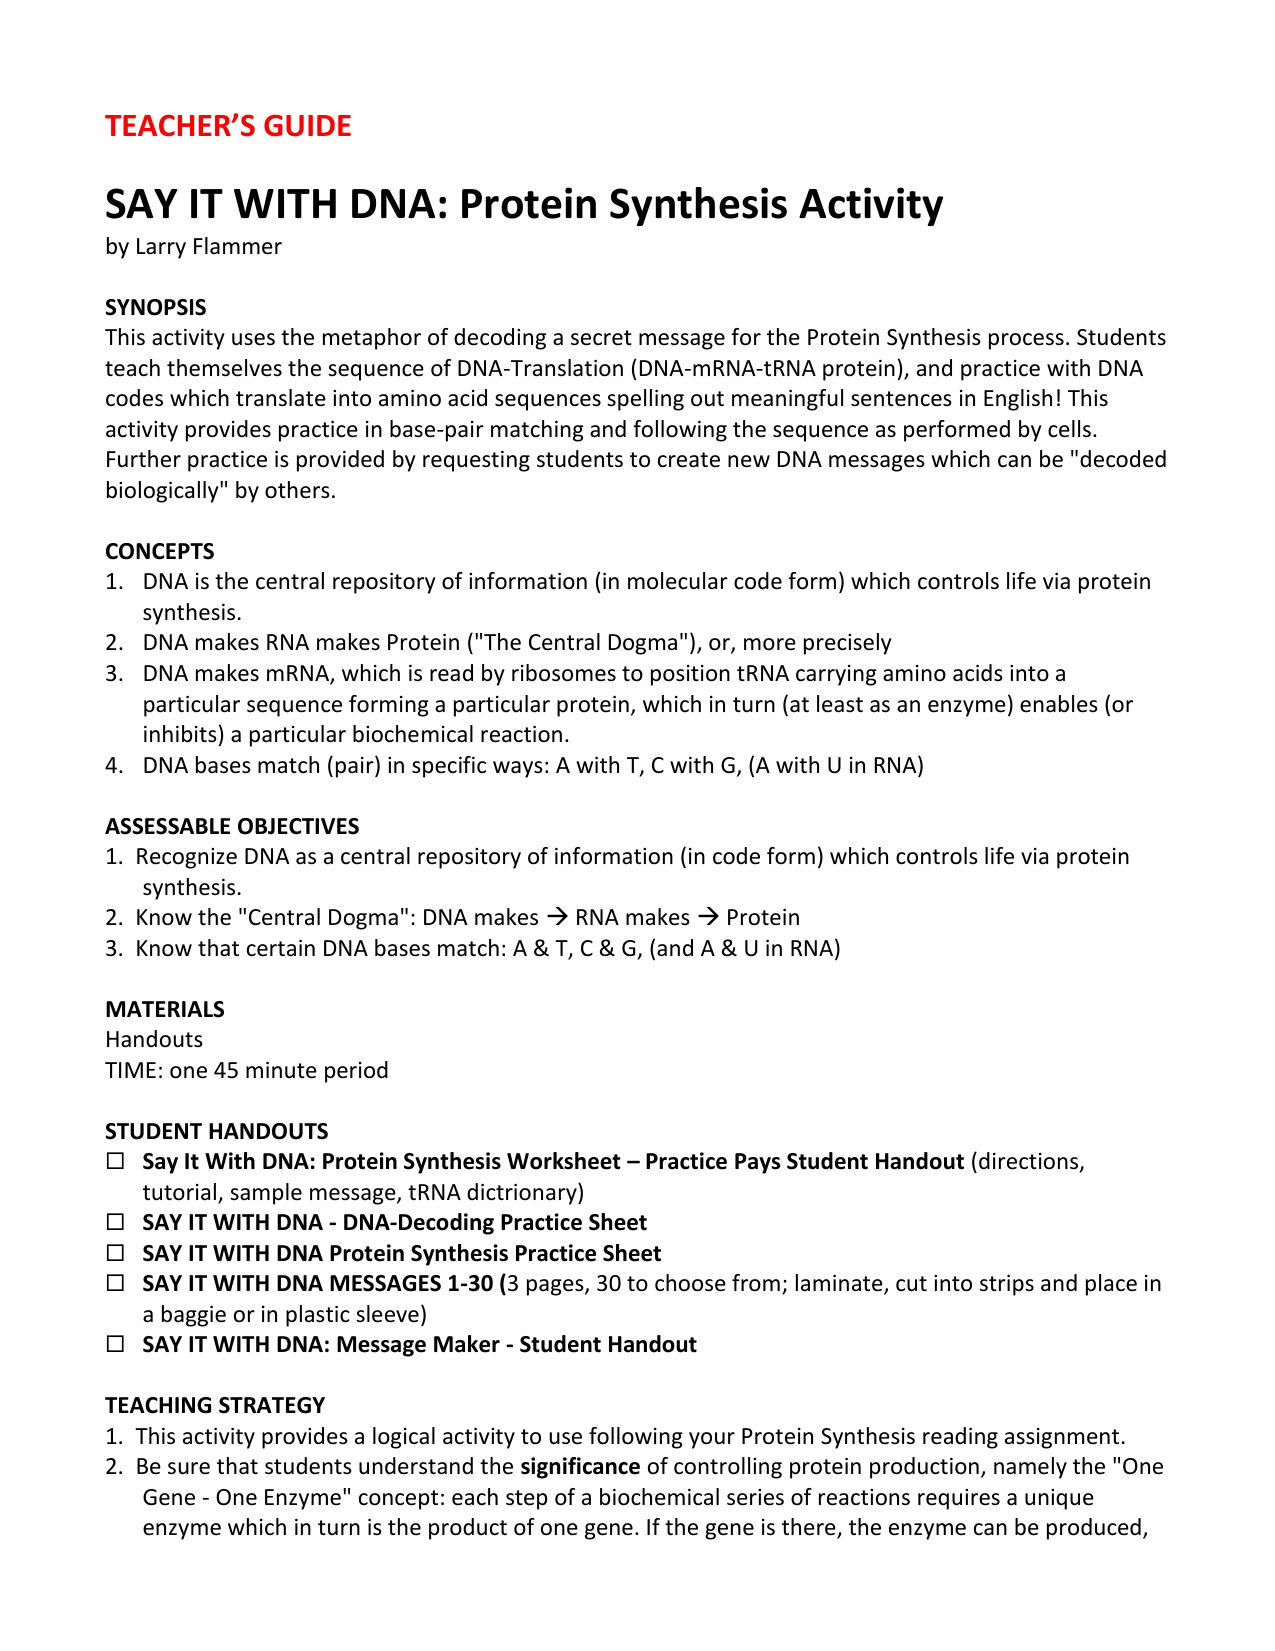 Say It With Dna Protein Synthesis Worksheet Practice Together With Say It With Dna Protein Synthesis Worksheet Answers